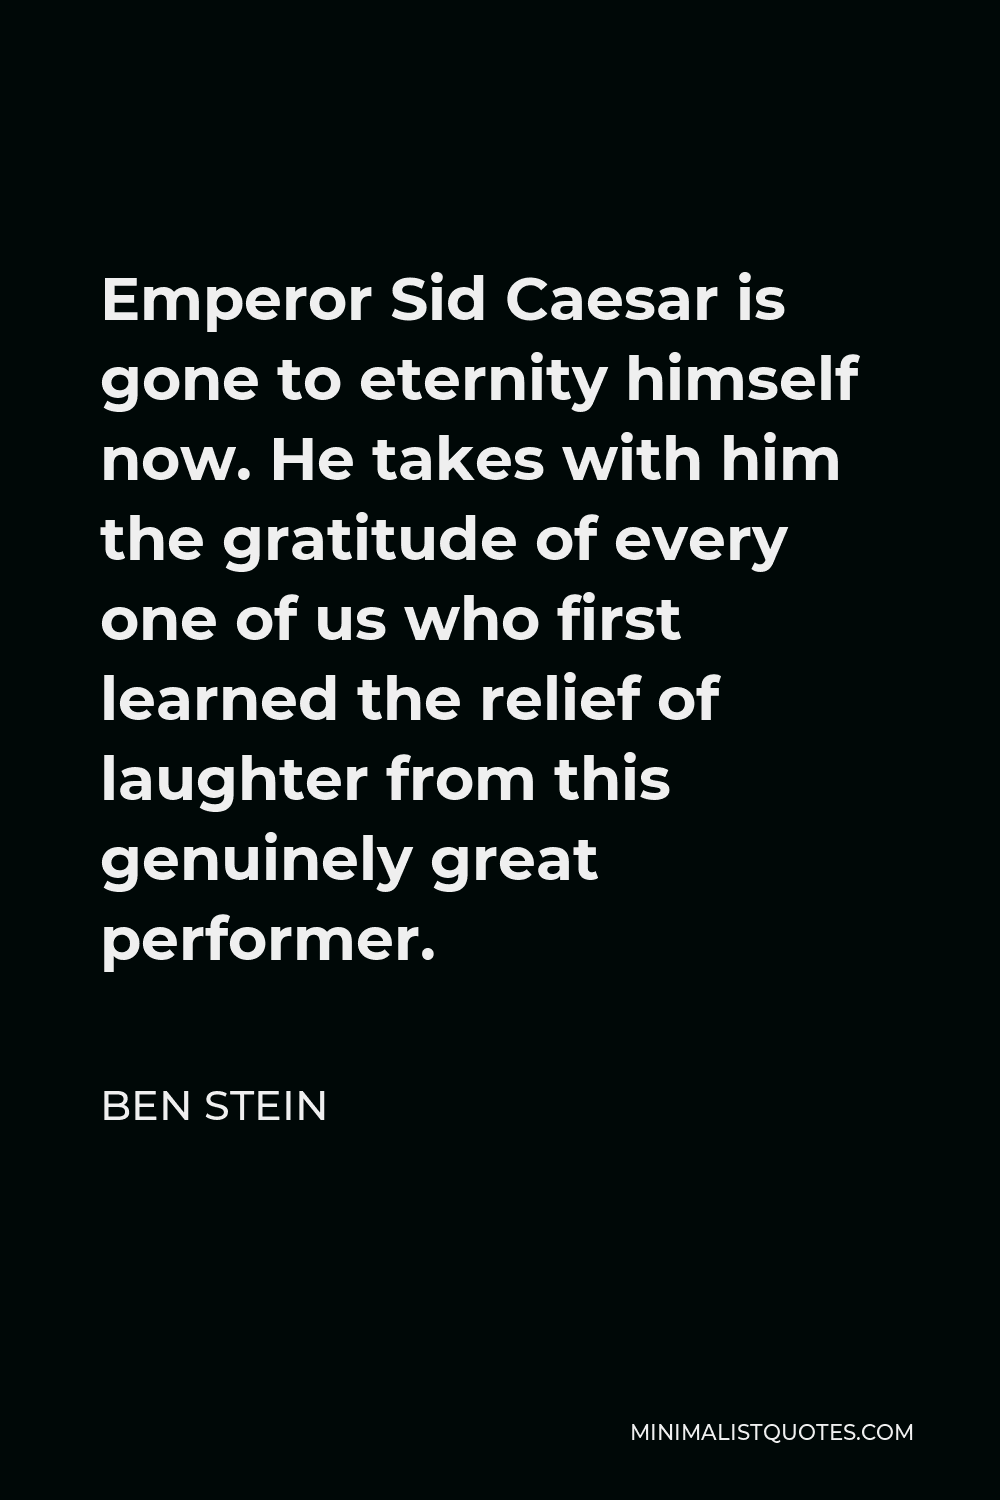 Ben Stein Quote - Emperor Sid Caesar is gone to eternity himself now. He takes with him the gratitude of every one of us who first learned the relief of laughter from this genuinely great performer.